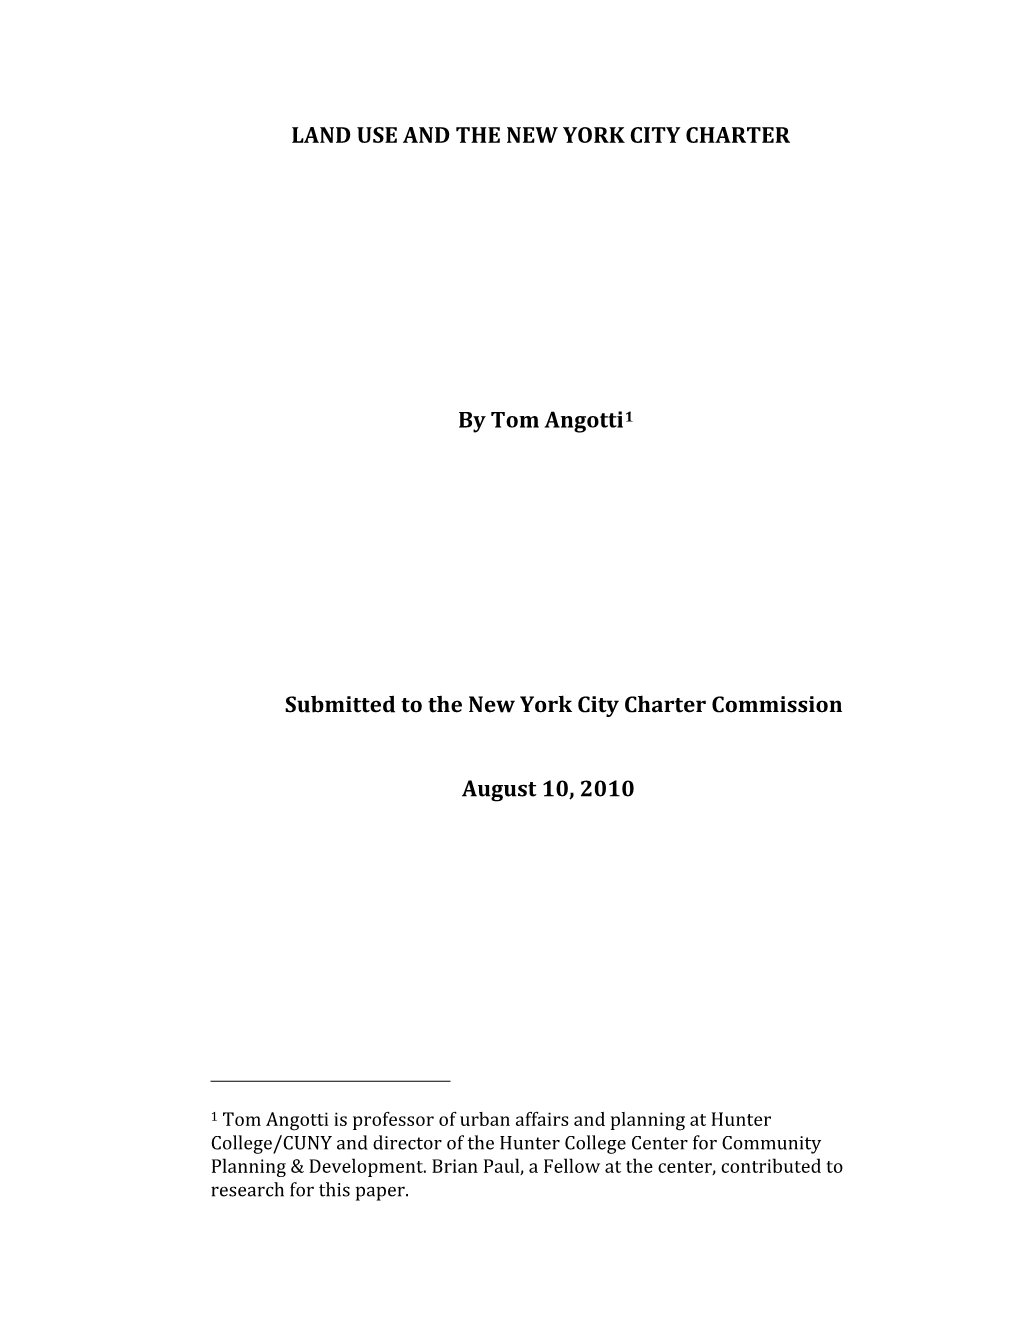 Land Use and the New York City Charter